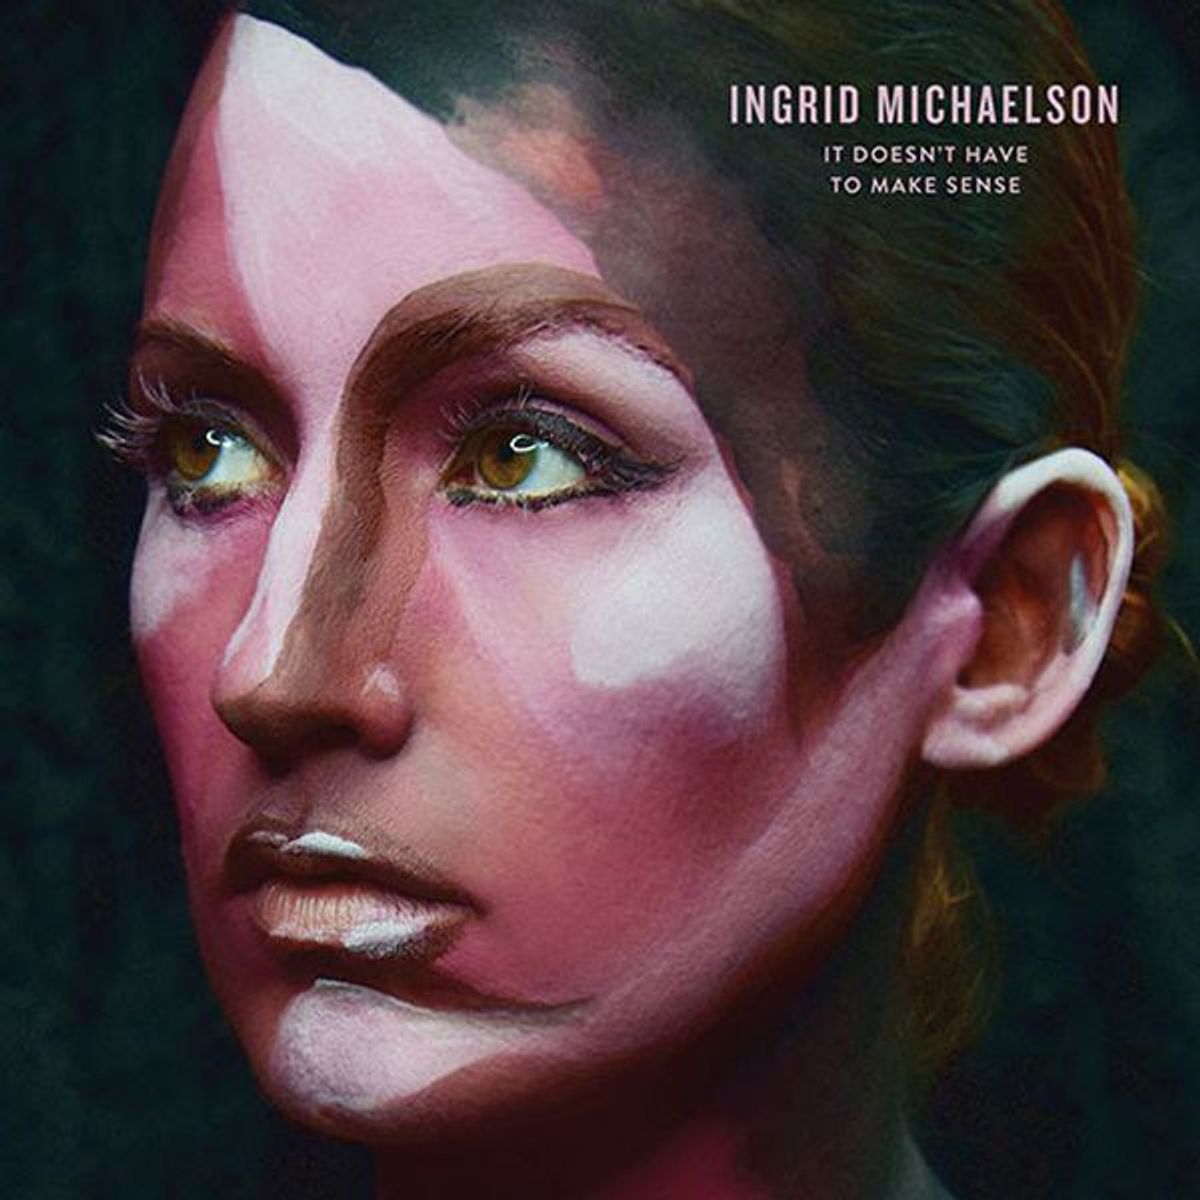 Ingrid Michaelson Gives Us a Piece of Her Heart with 'It Doesn’t Have to Make Sense'